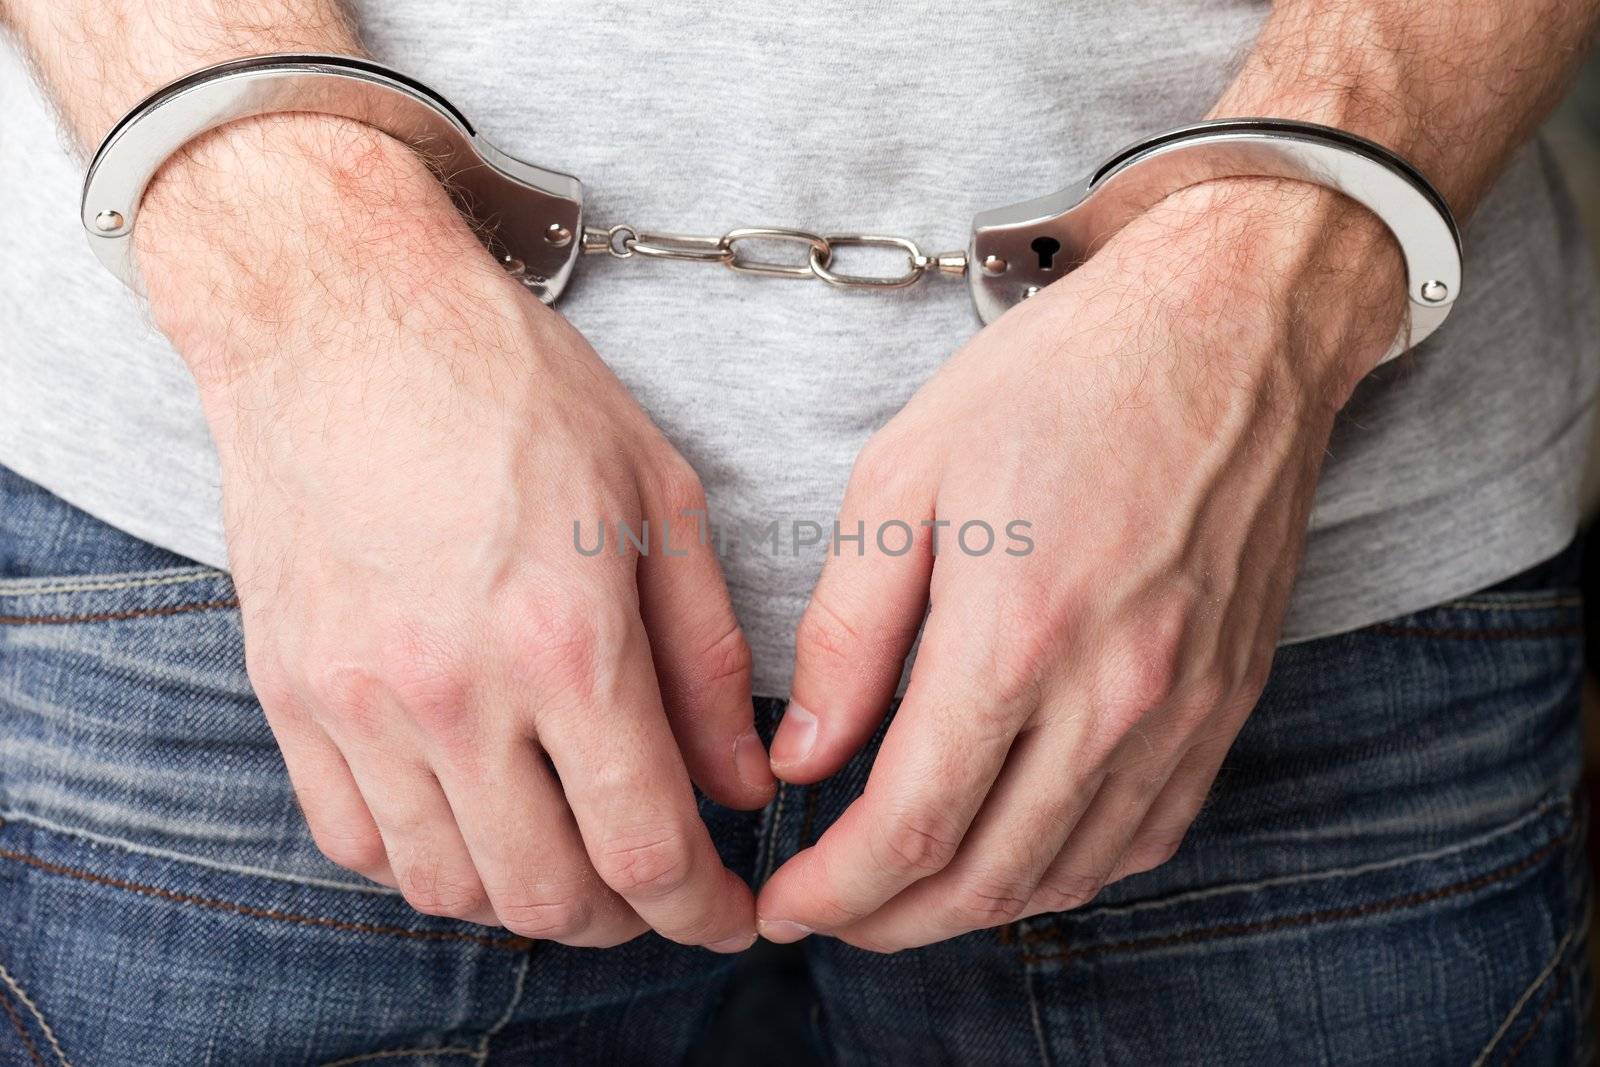 Police law steel handcuffs arrest crime human hand